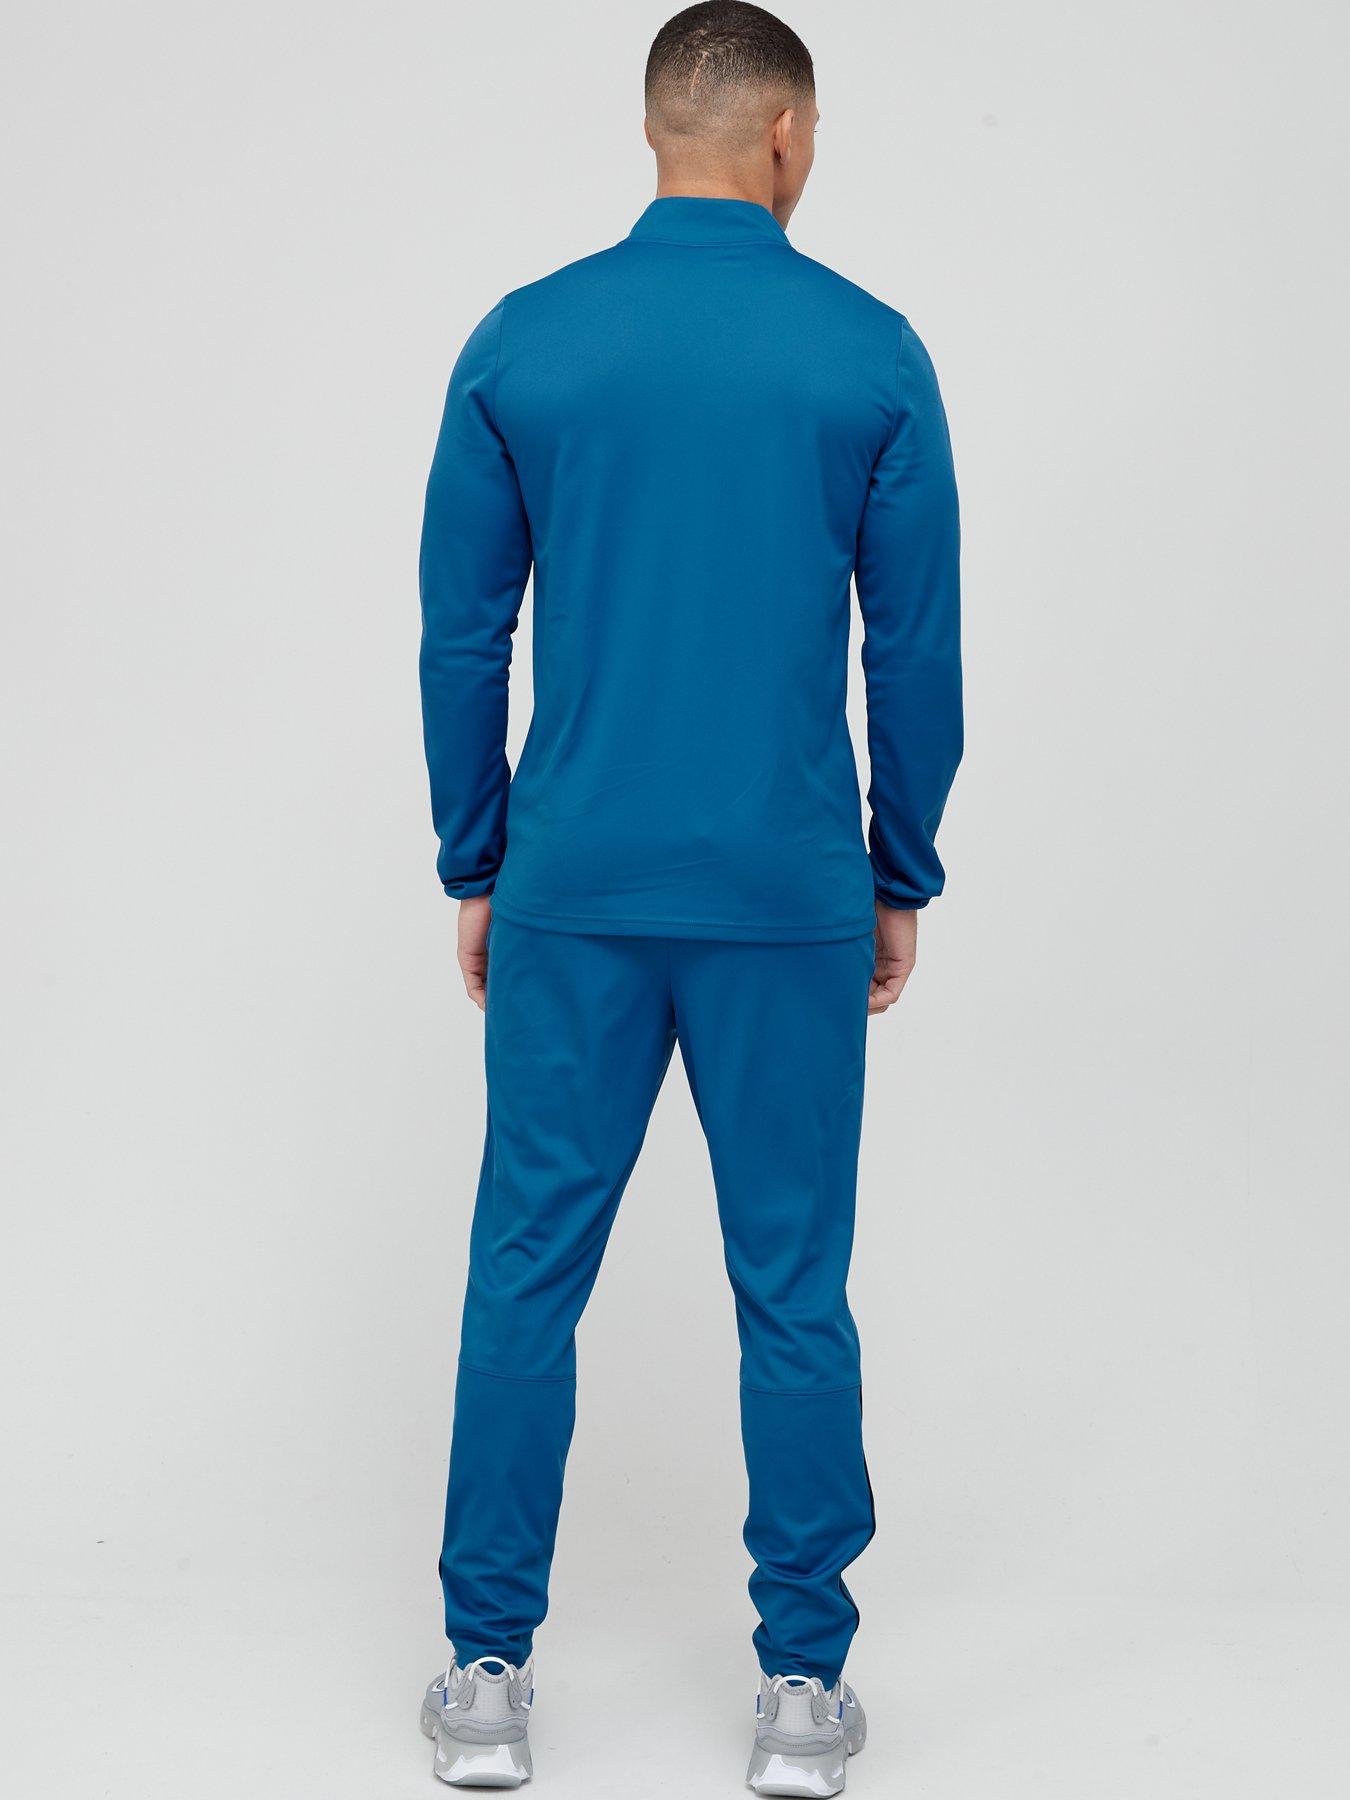  Mens Academy 21 Dry Tracksuit